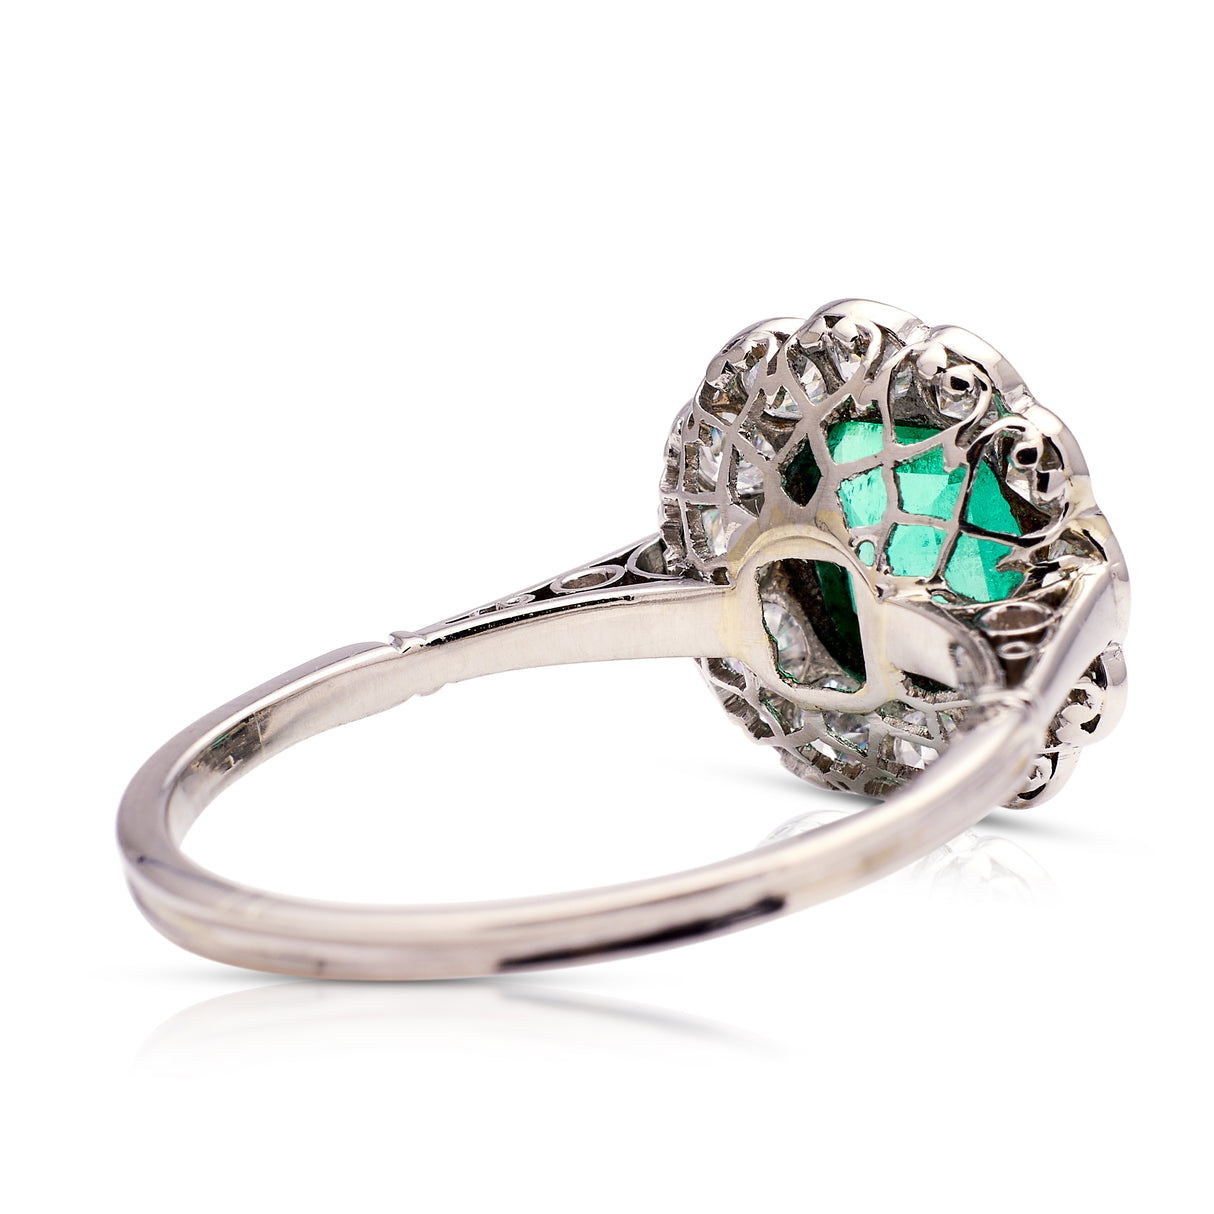 Edwardian emerald and diamond cluster ring, rear view. 